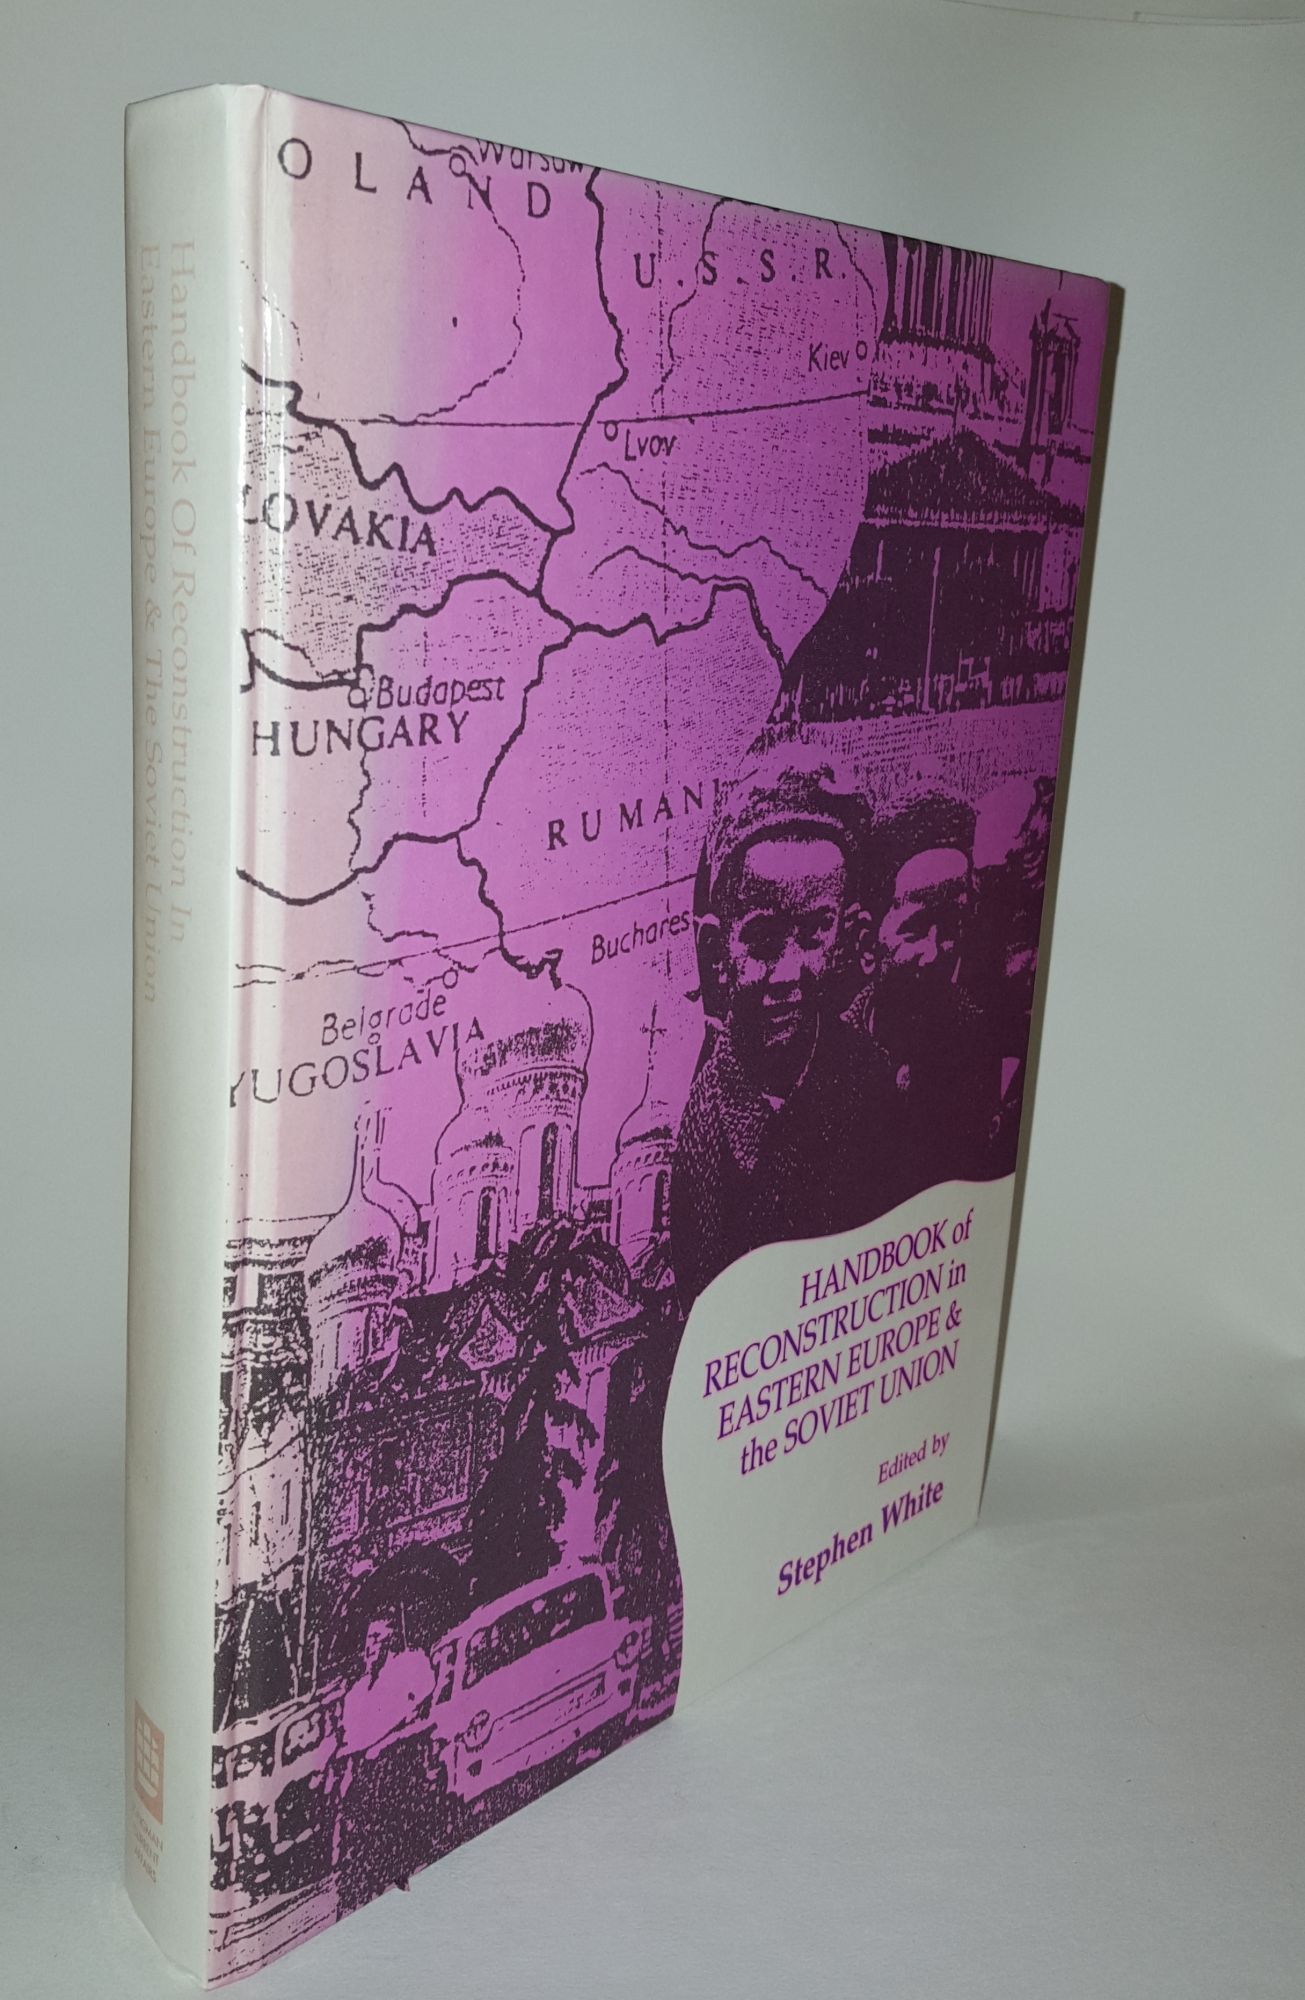 WHITE Stephen - Handbook of Reconstruction in Eastern Europe and the Soviet Union